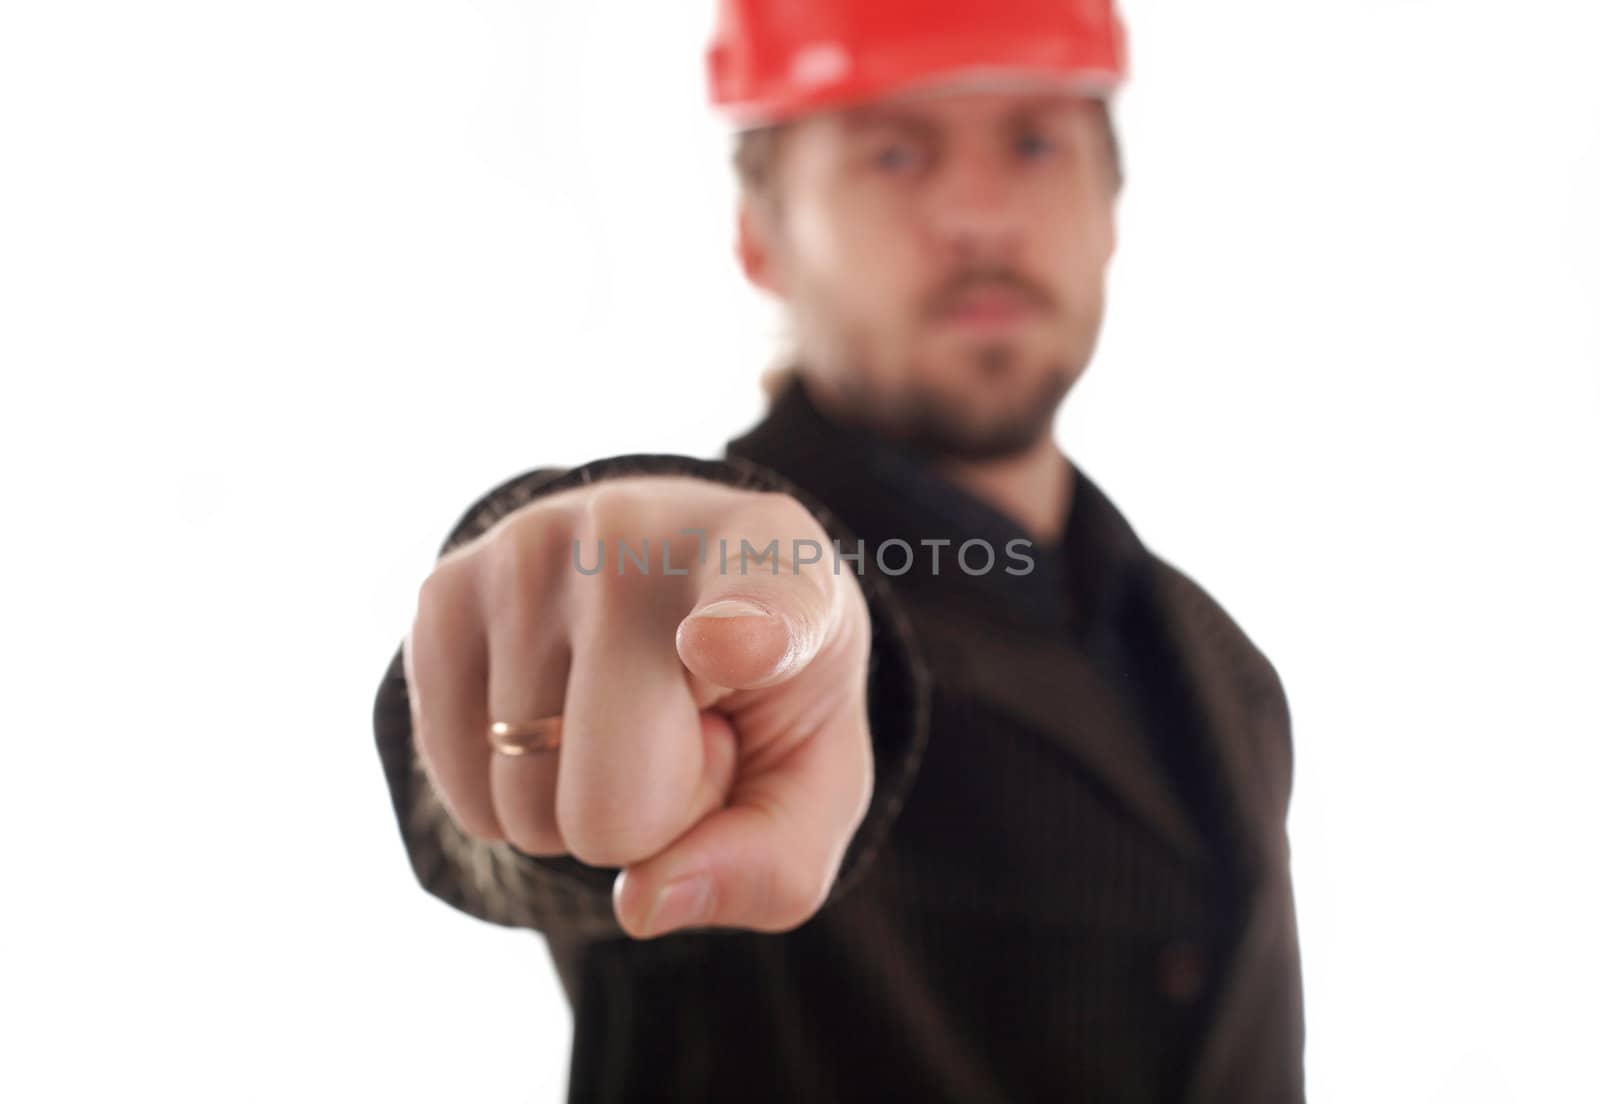 An image of  worker showing his forefinger